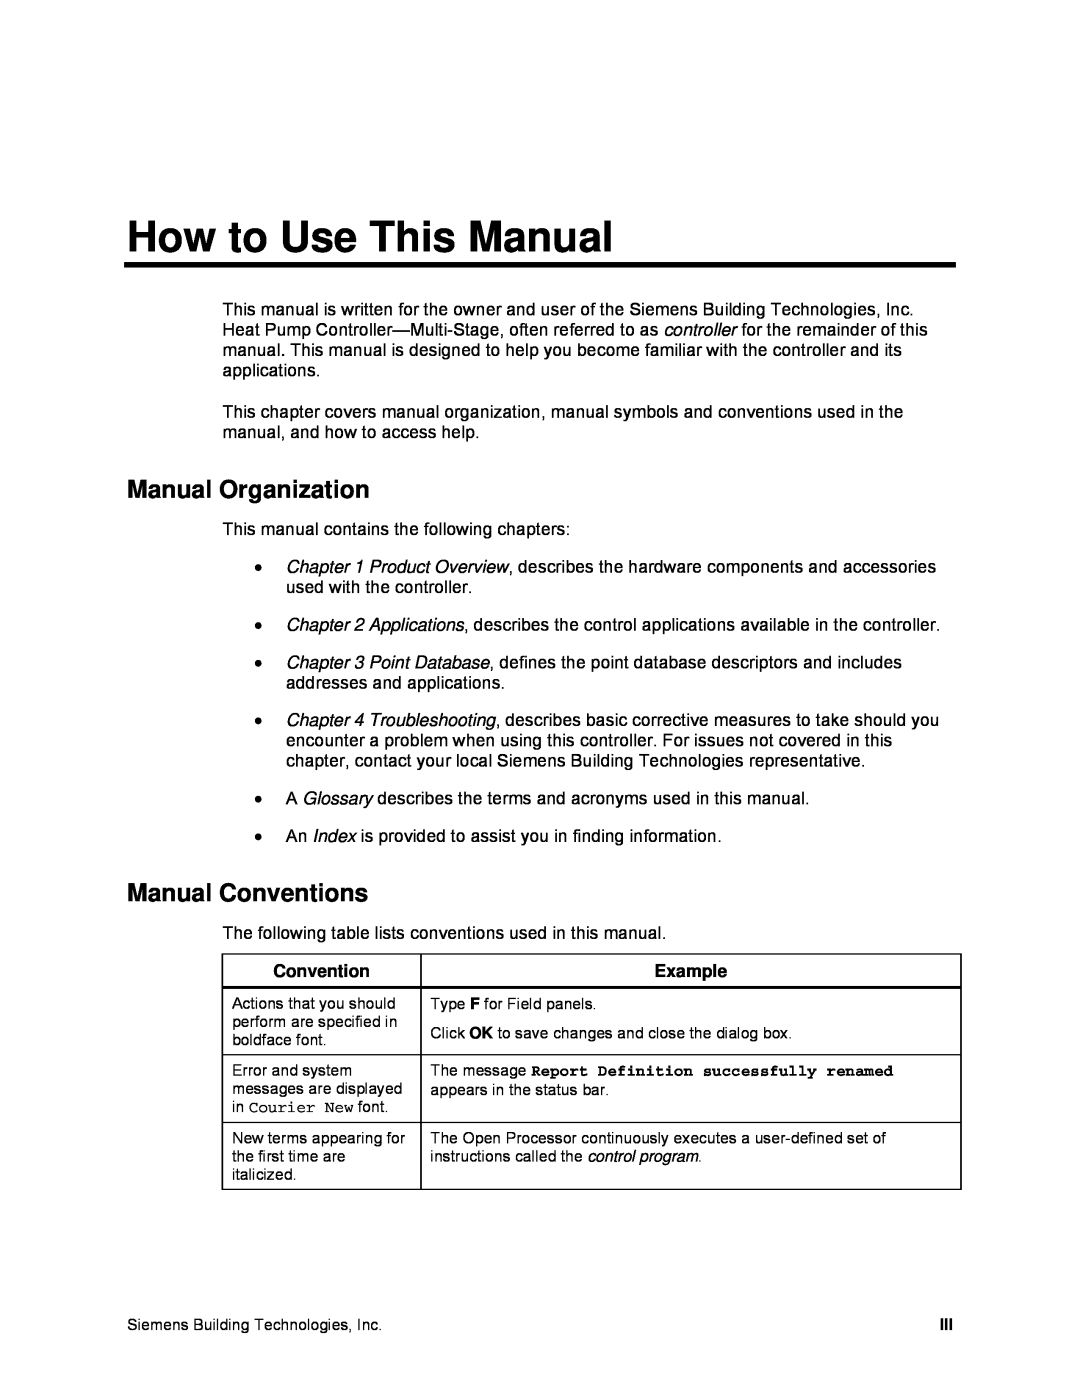 Siemens 125-699 owner manual How to Use This Manual, Manual Organization, Manual Conventions 